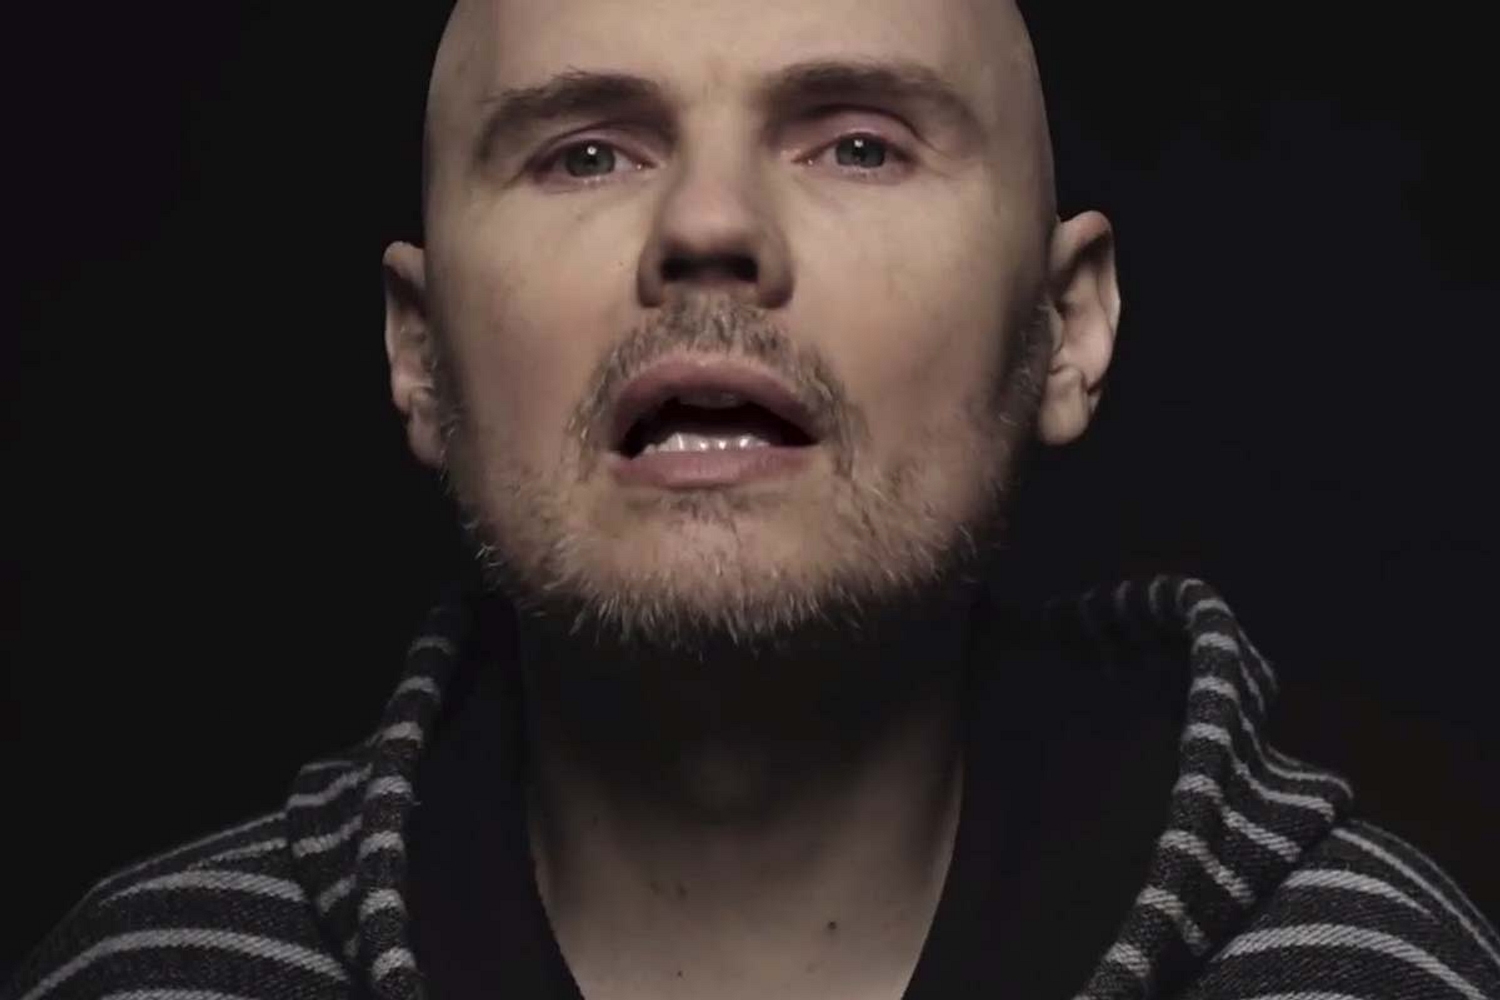 Billy Corgan lands on the moon for The Smashing Pumpkins’ ‘Being Beige’ video